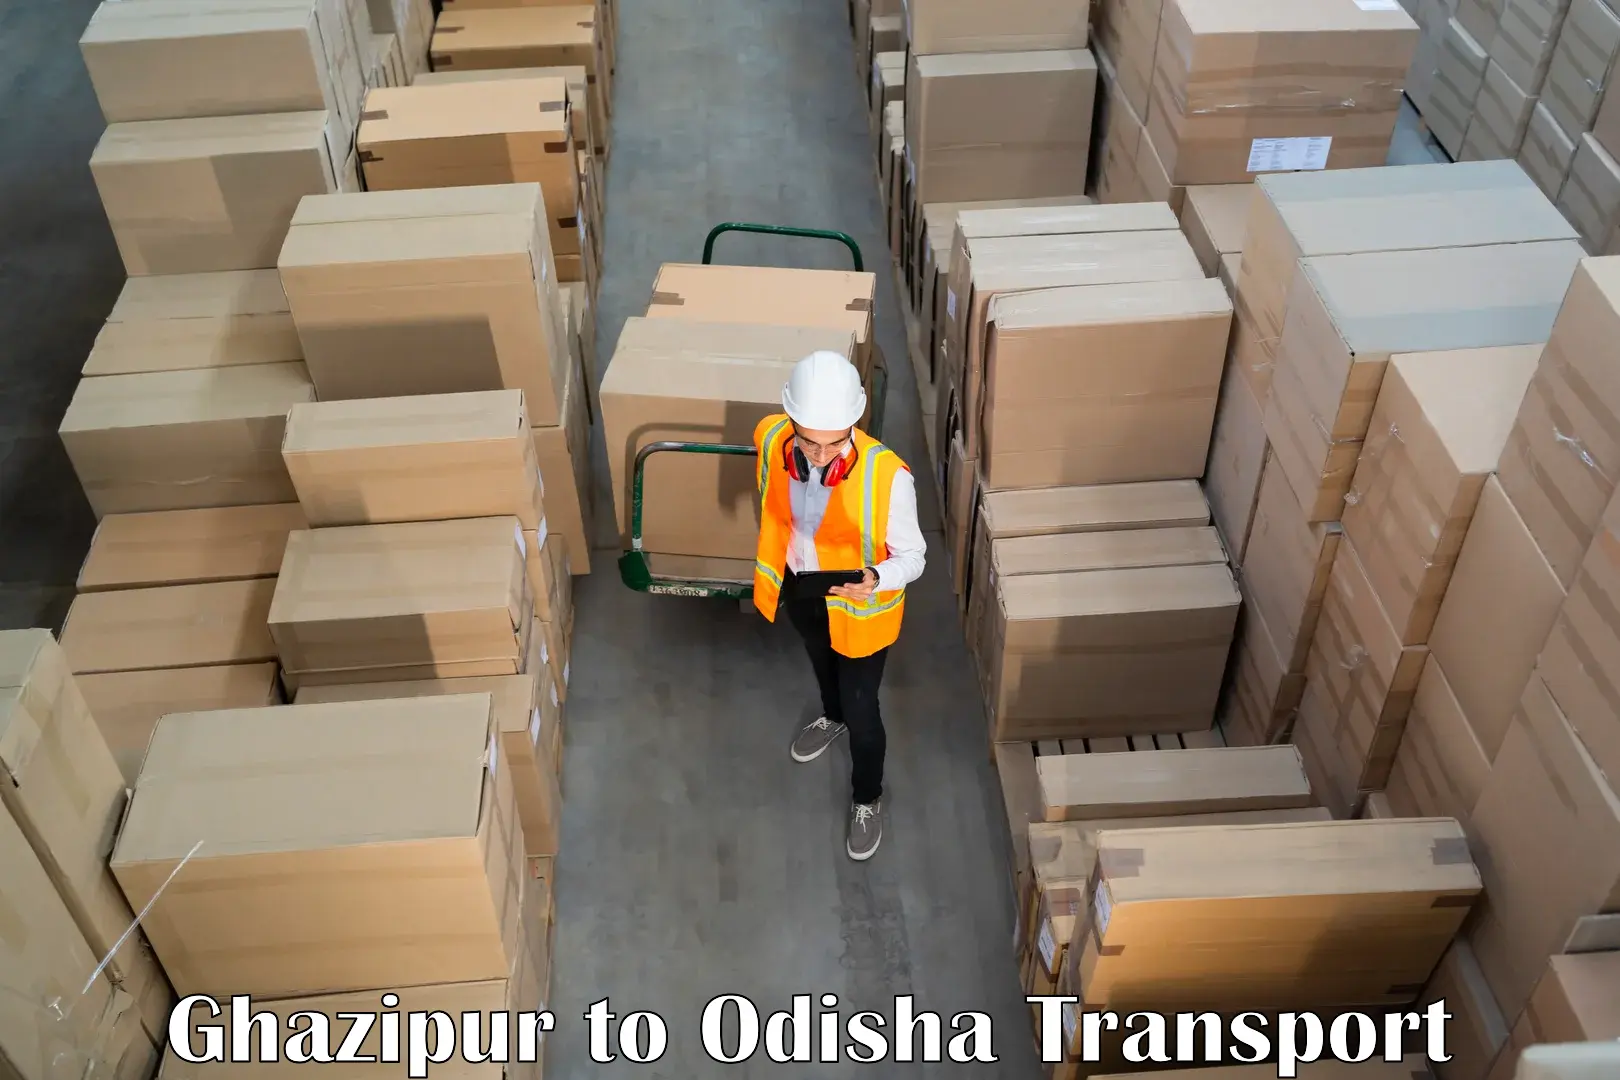 Online transport service Ghazipur to Mayurbhanj